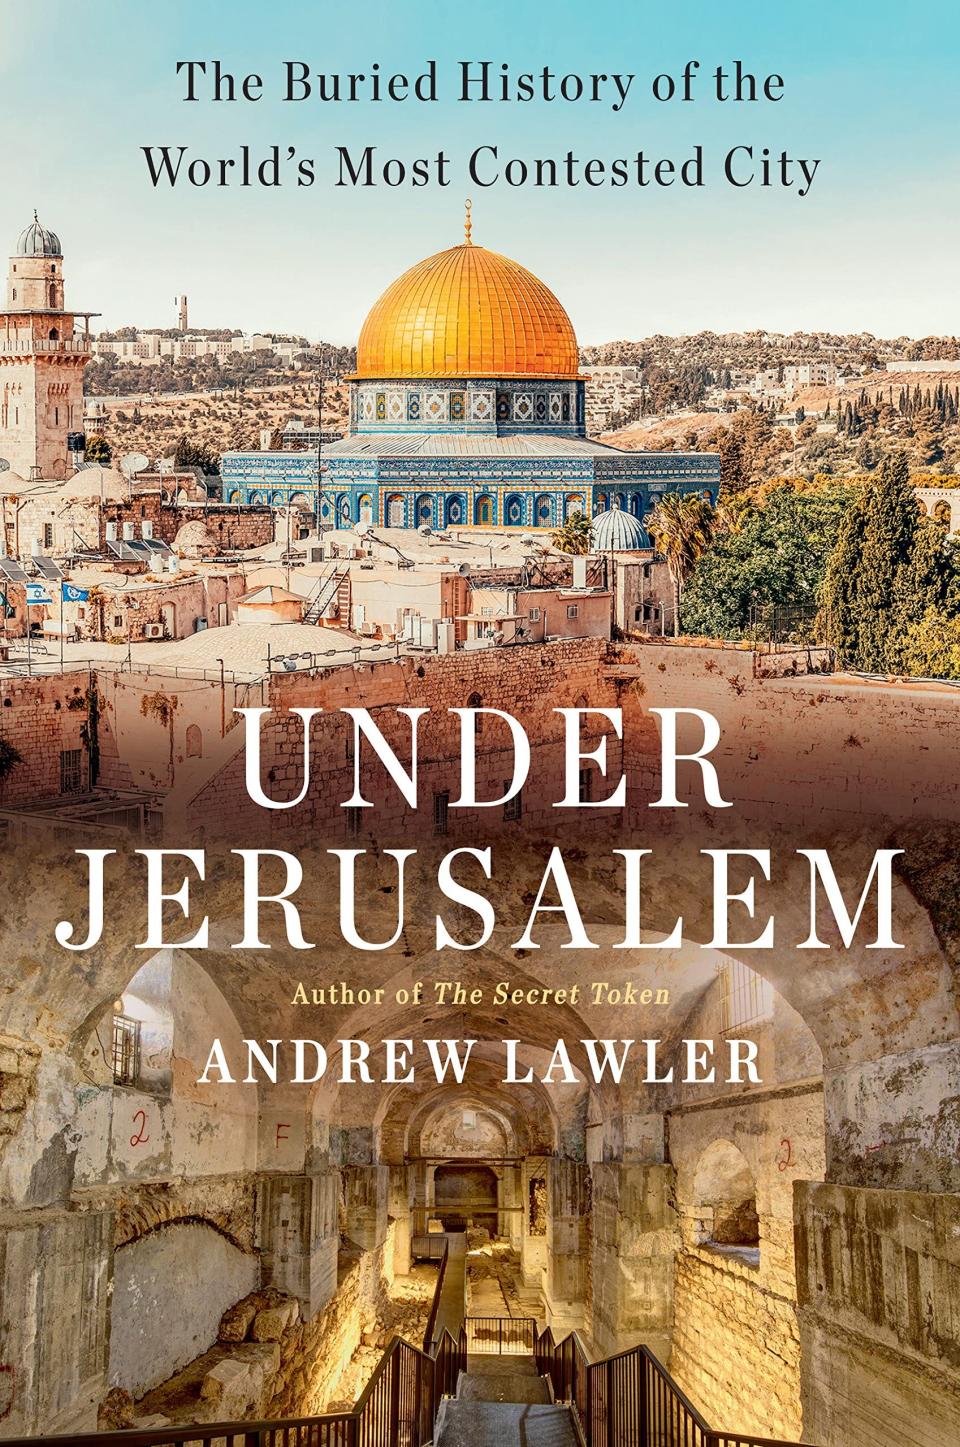 Andrew Lawler discusses his new book, "Under Jerusalem," during a virtual author event hosted by The BookMark on Feb. 21.